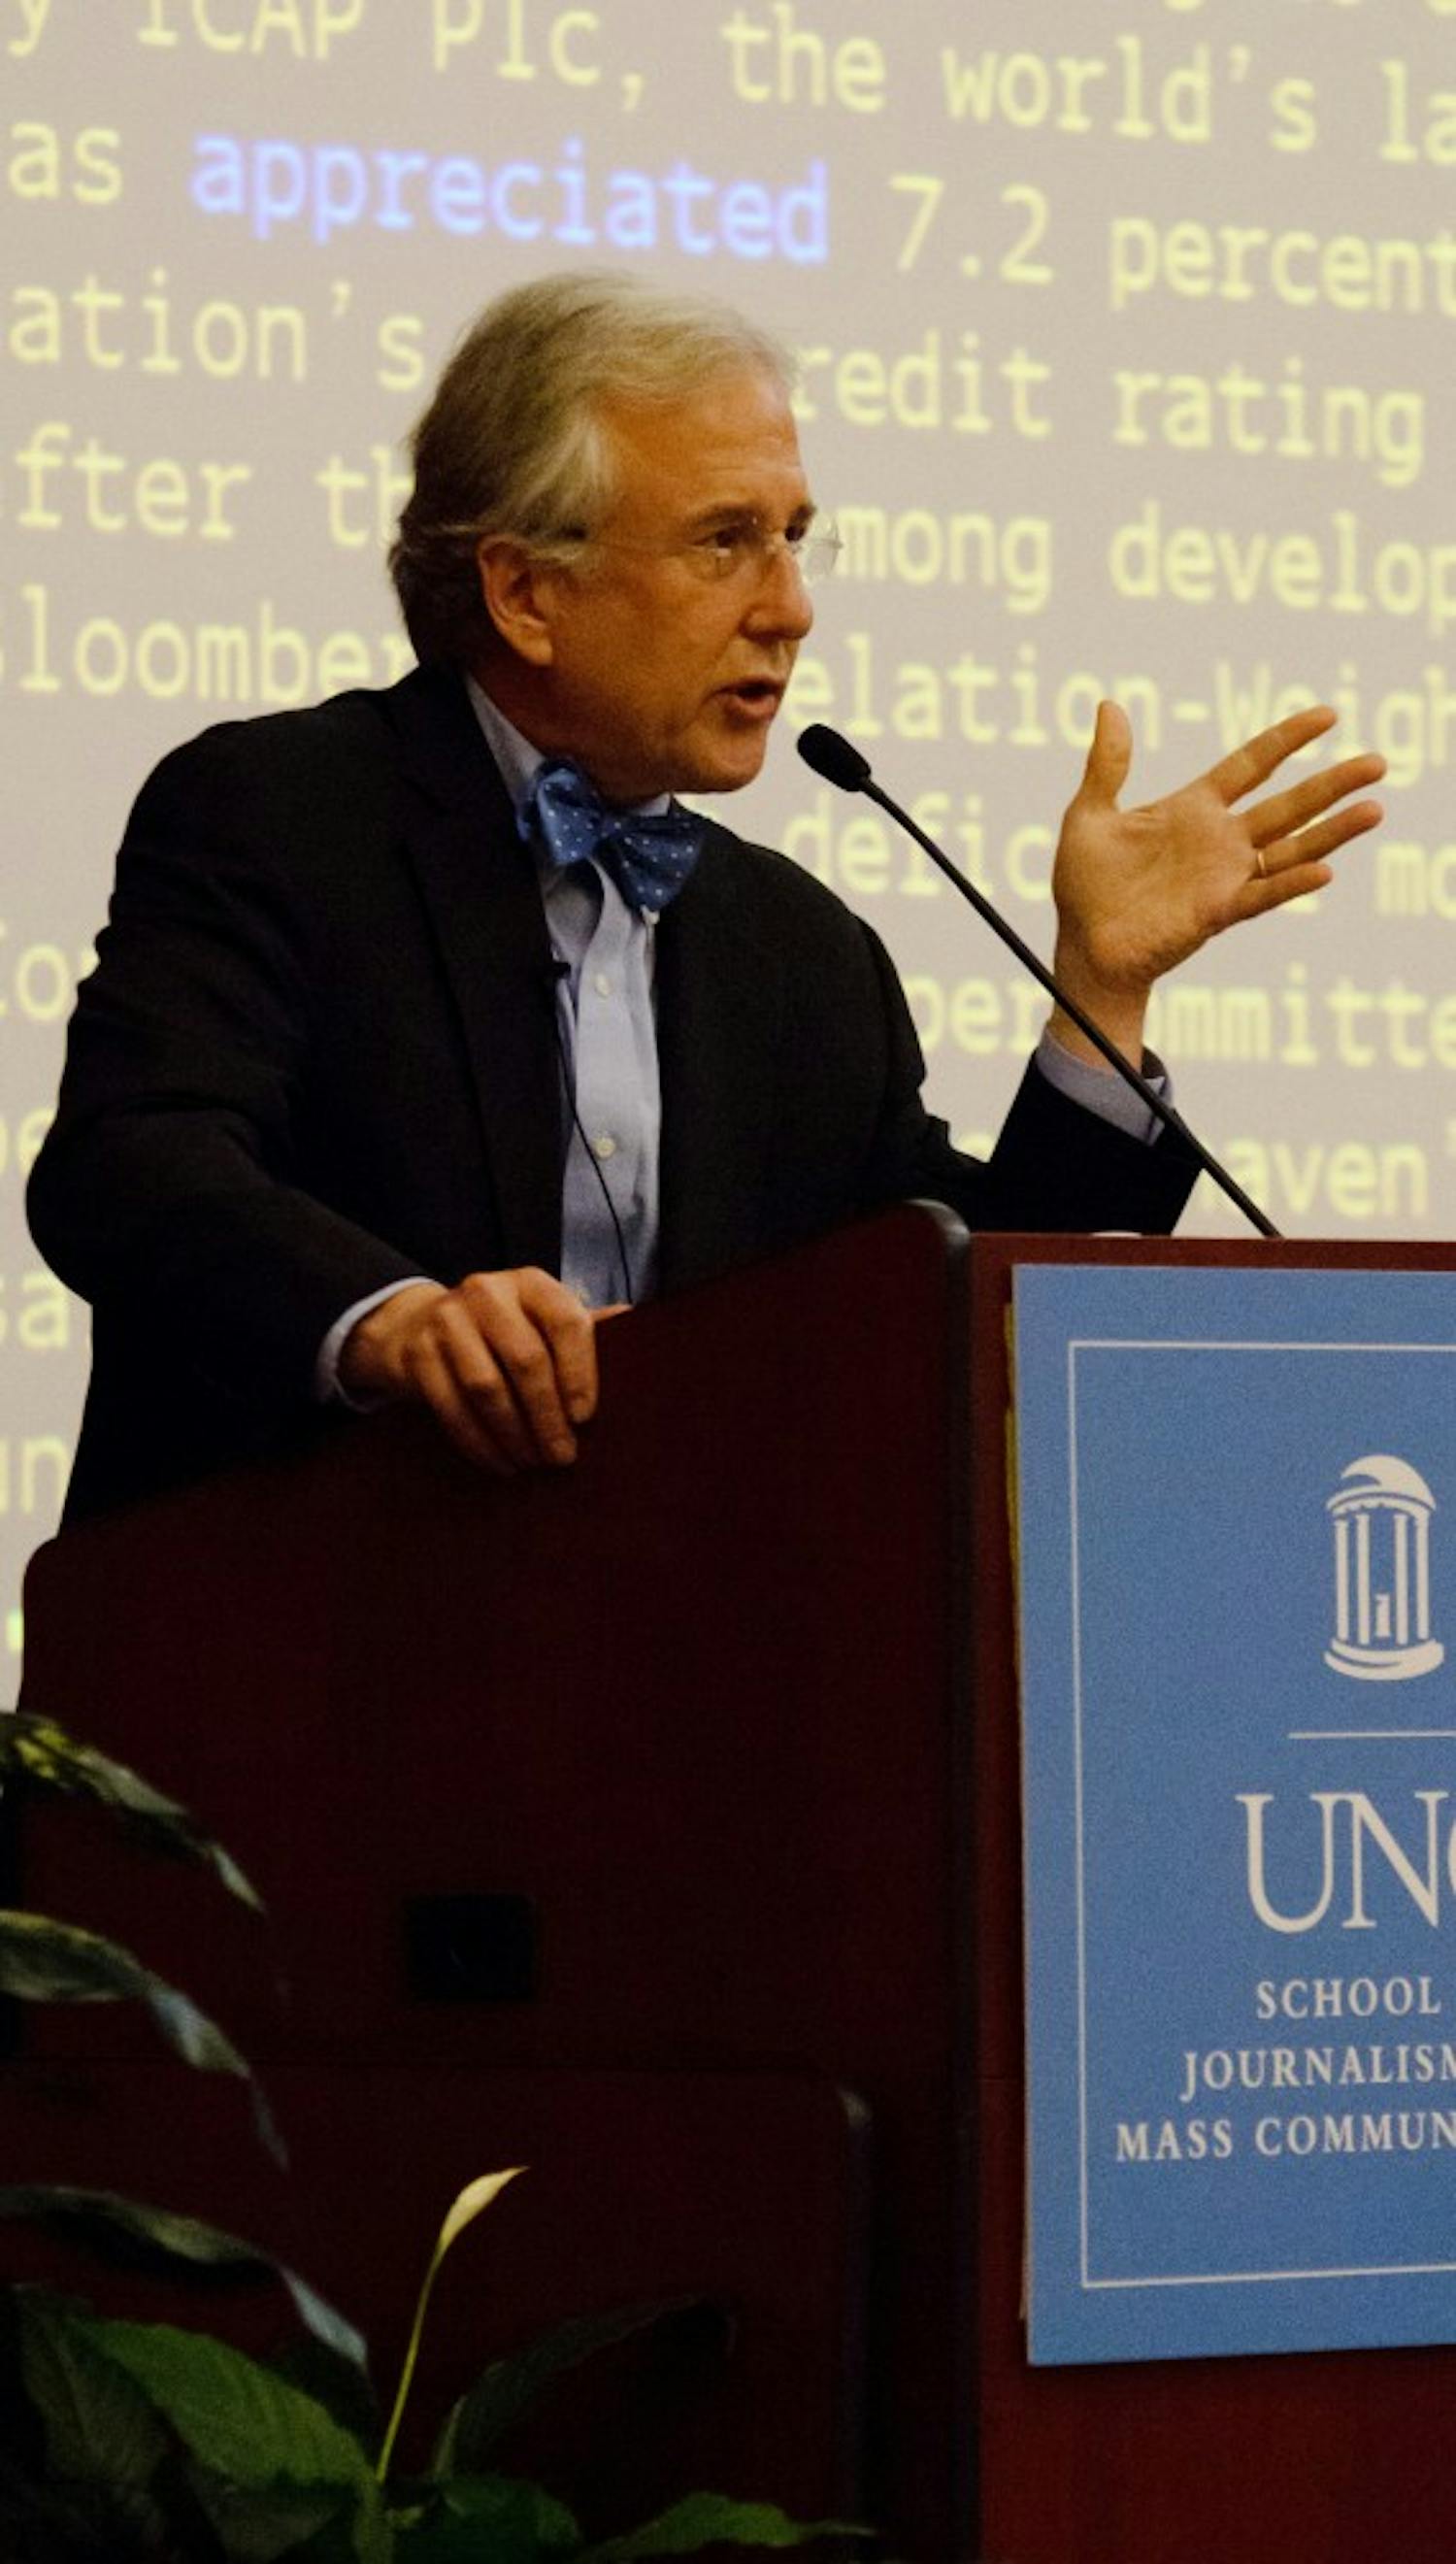 Matthew Winkler, Editor-in-Chief of Bloomberg News, addresses students and guests on the campus of The University of North Carolina at Chapel Hill on October 16th, 2012 in the George Watts Hill Alumni Center. Mr. Winkler's lecture was titled, "2012: The Economy Election".